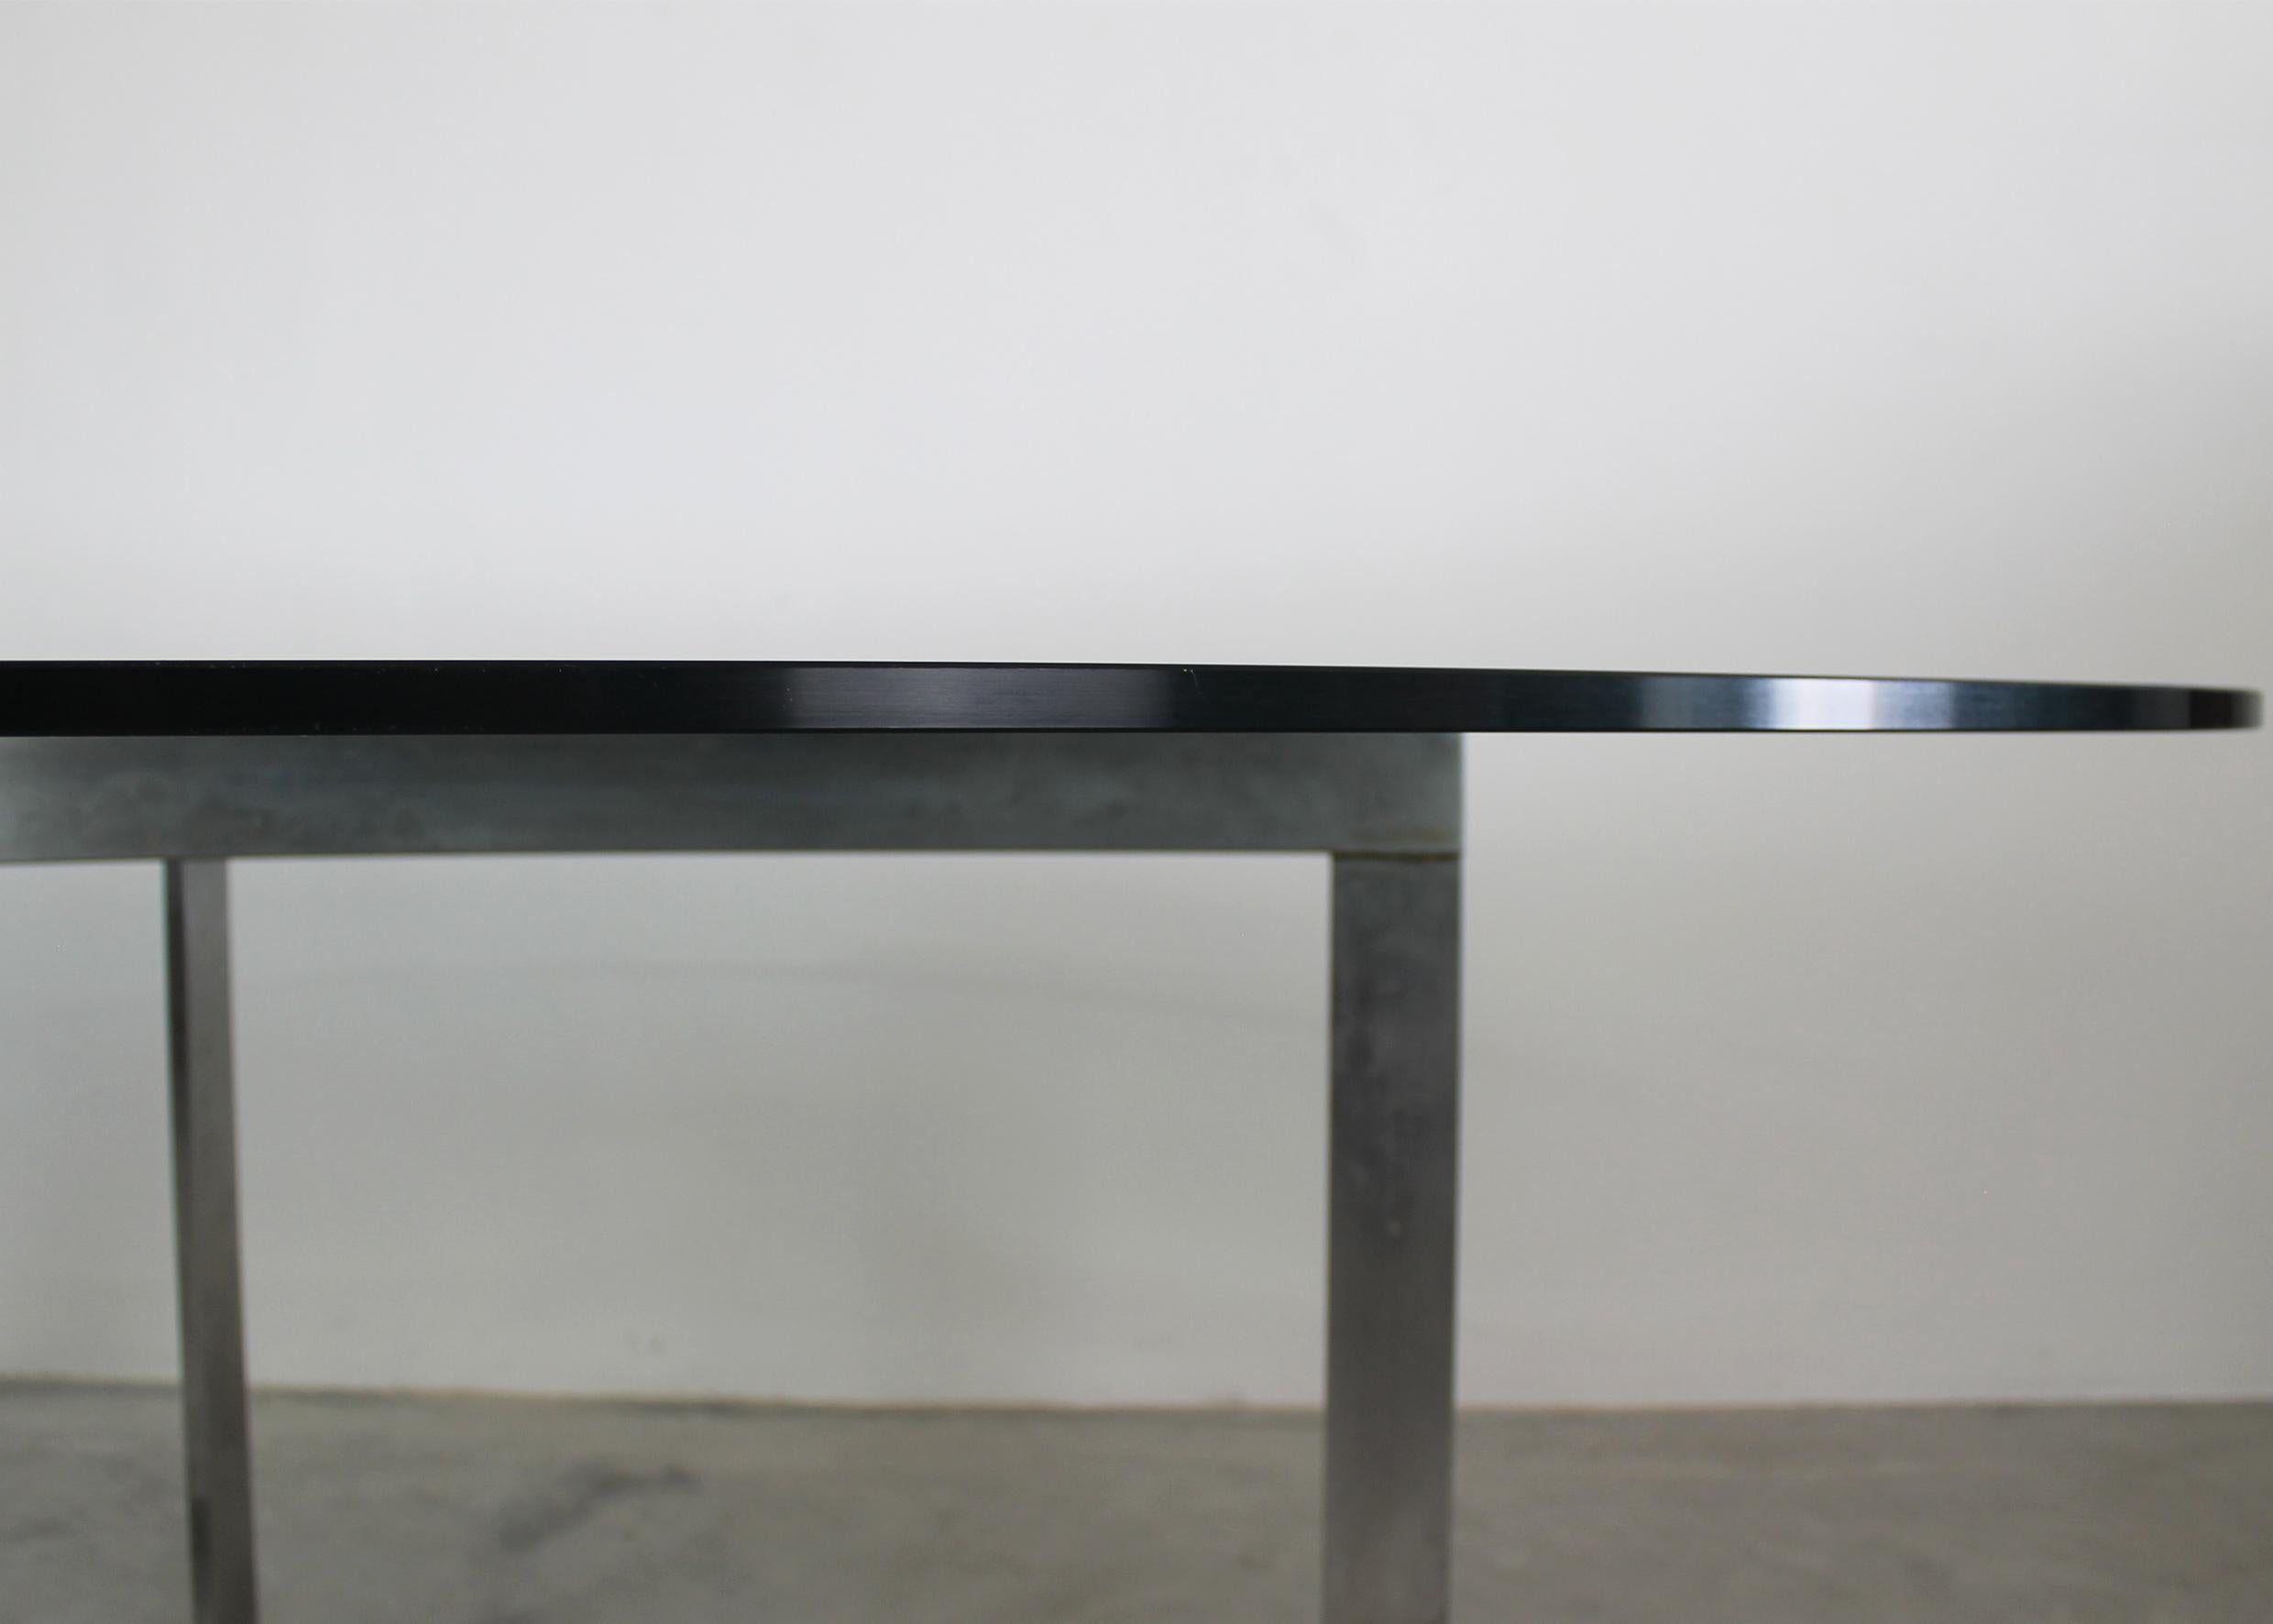 Italian Vittorio Introini Oval Shaped Dining Table in Steel ang Glass by Saporiti 1970s For Sale